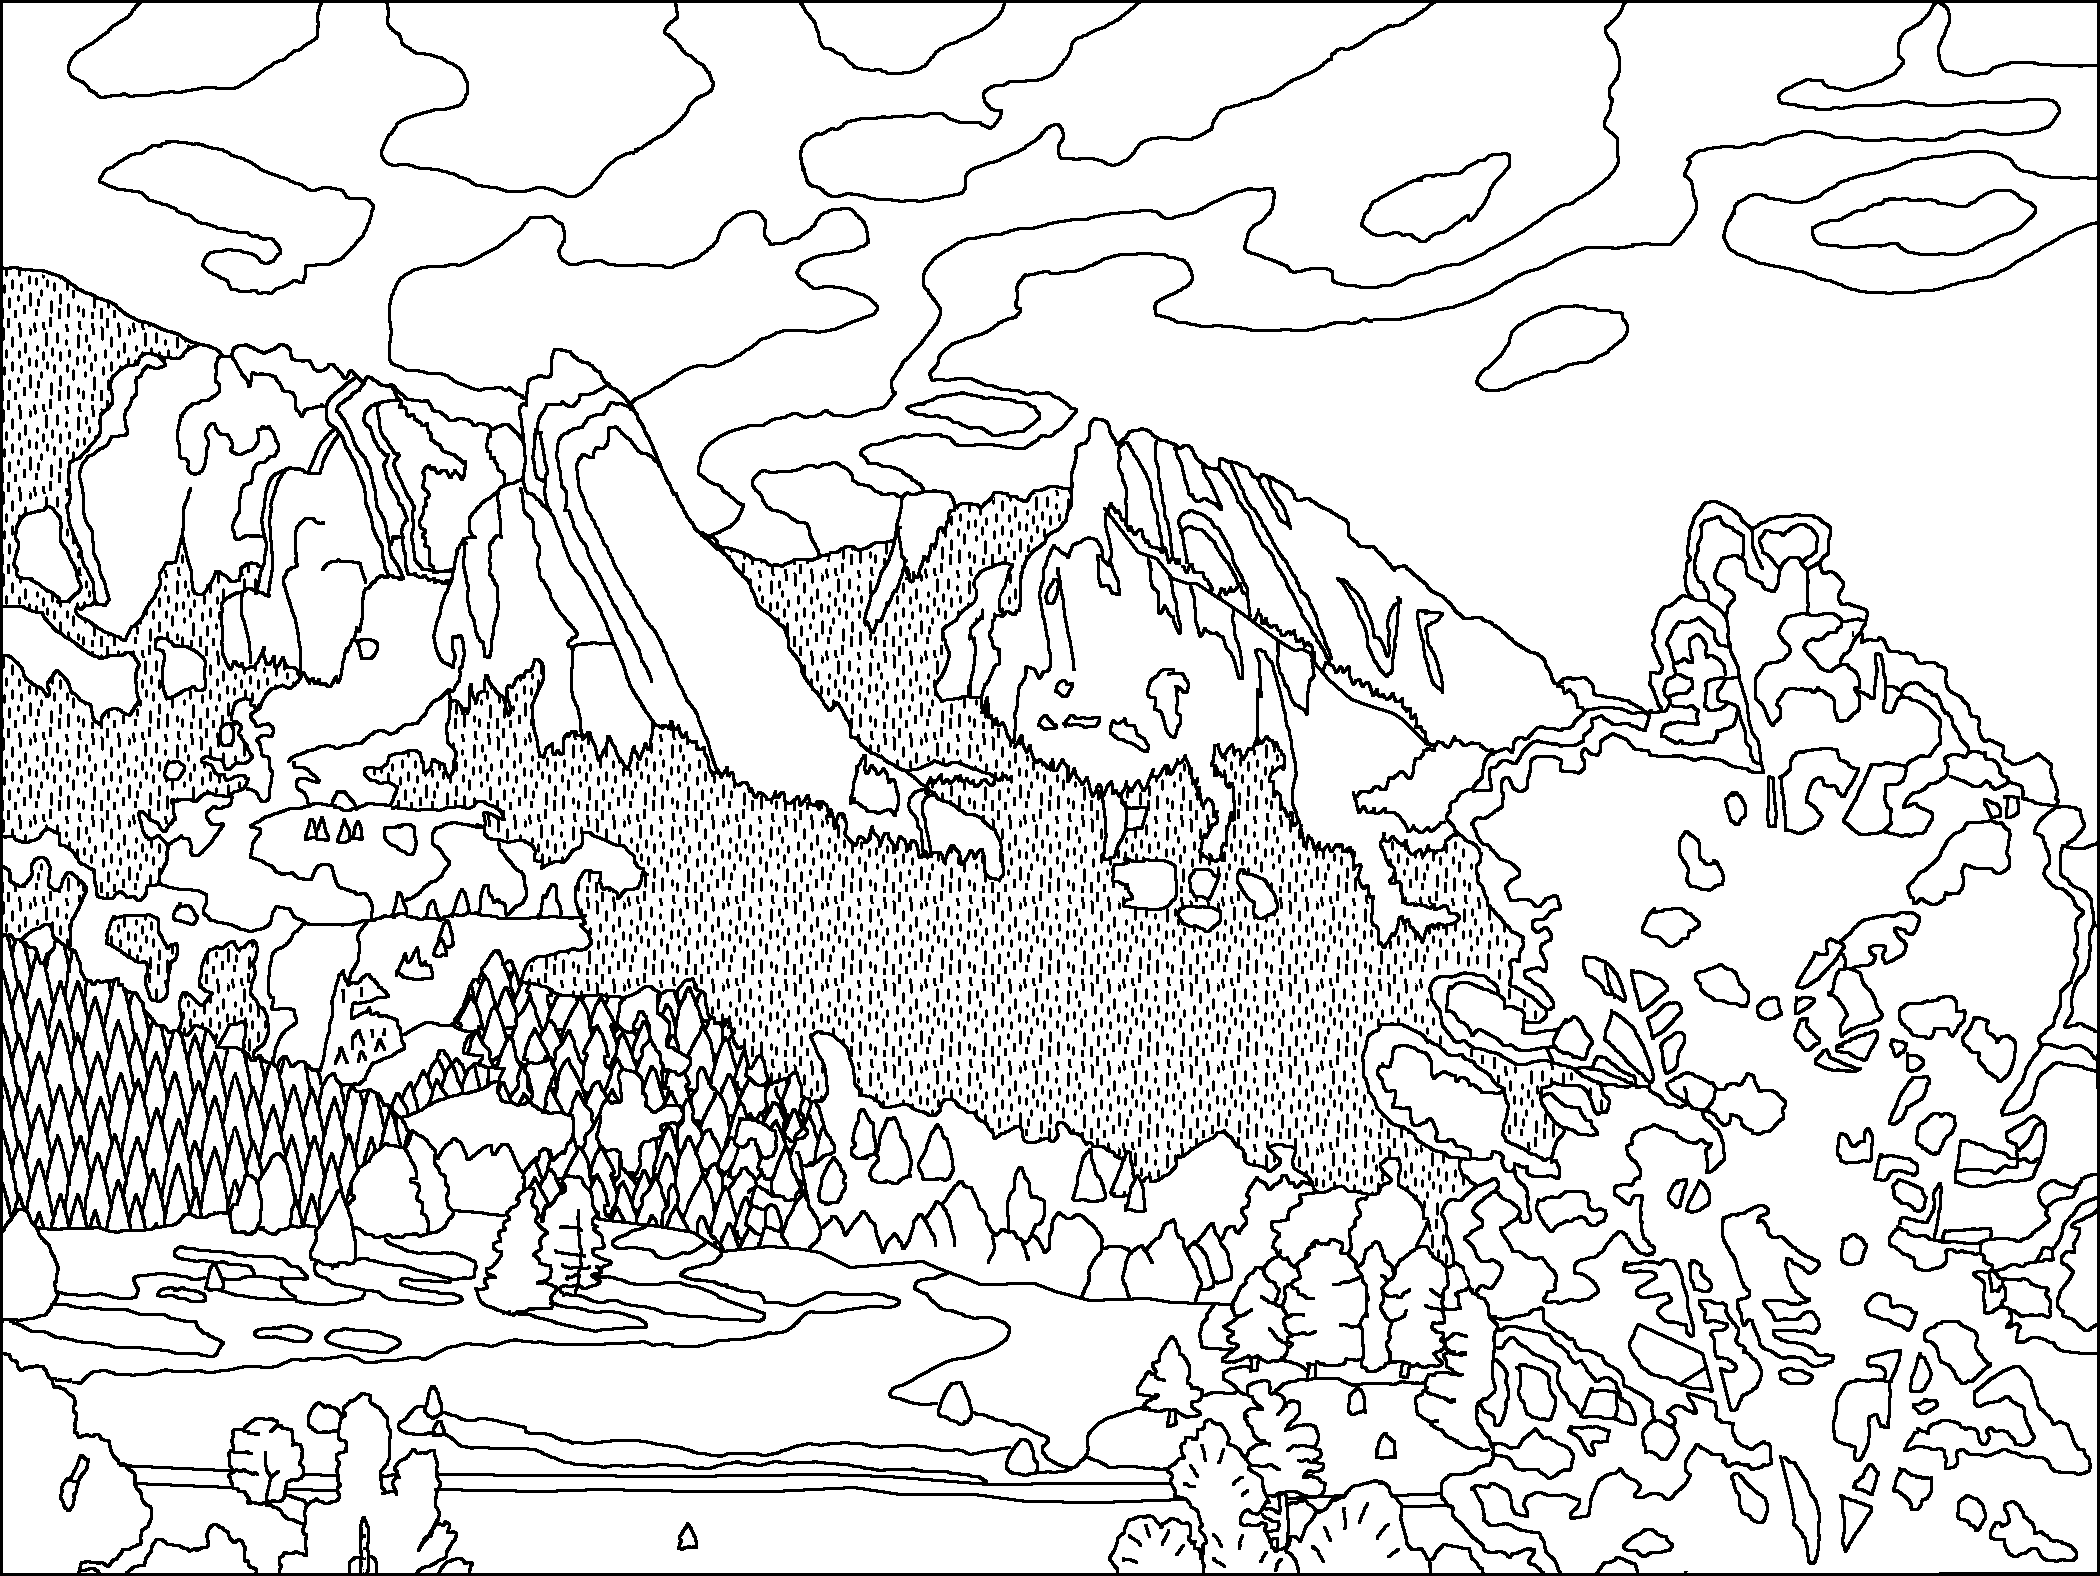 mountains-coloring-pages-best-coloring-pages-for-kids